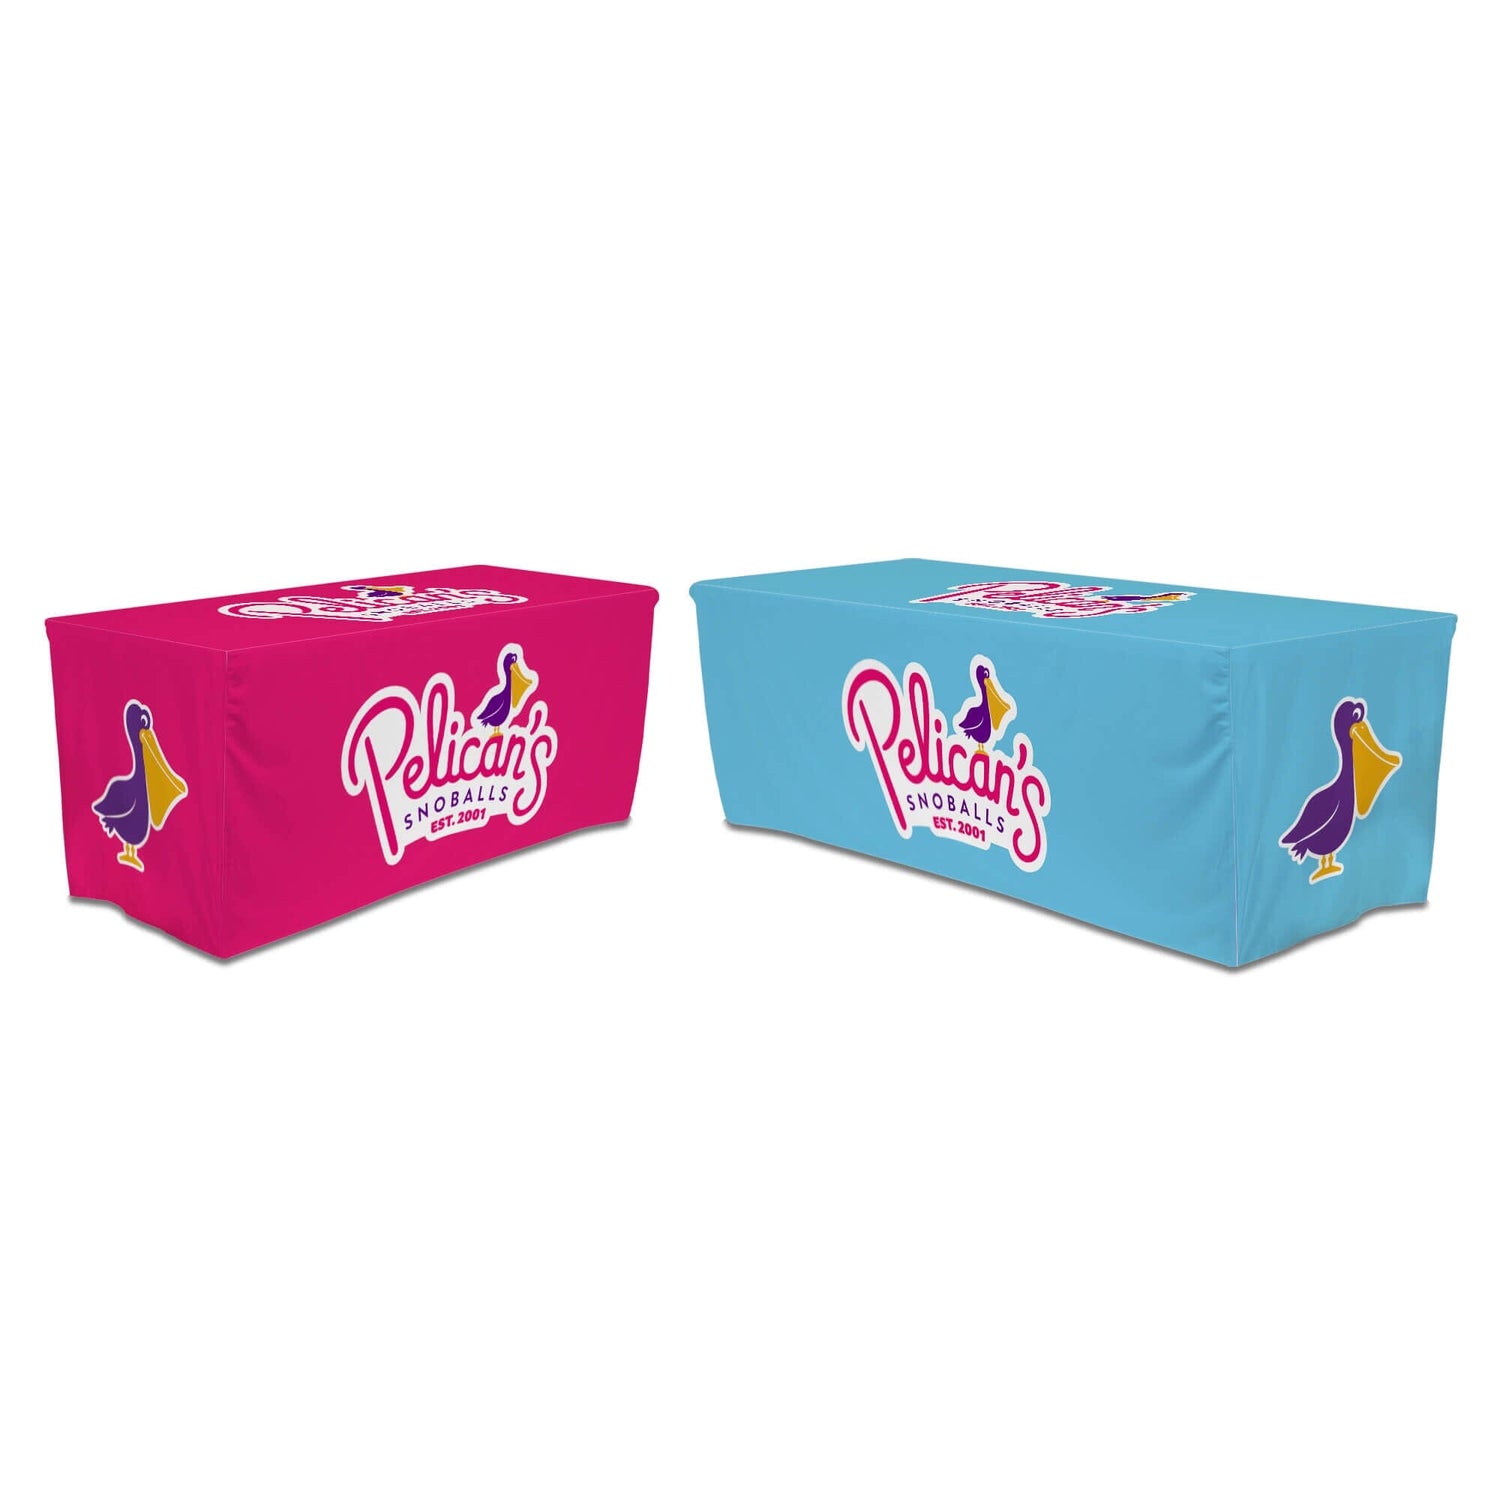 Pelican's Snoballs Fitted Table Cover 